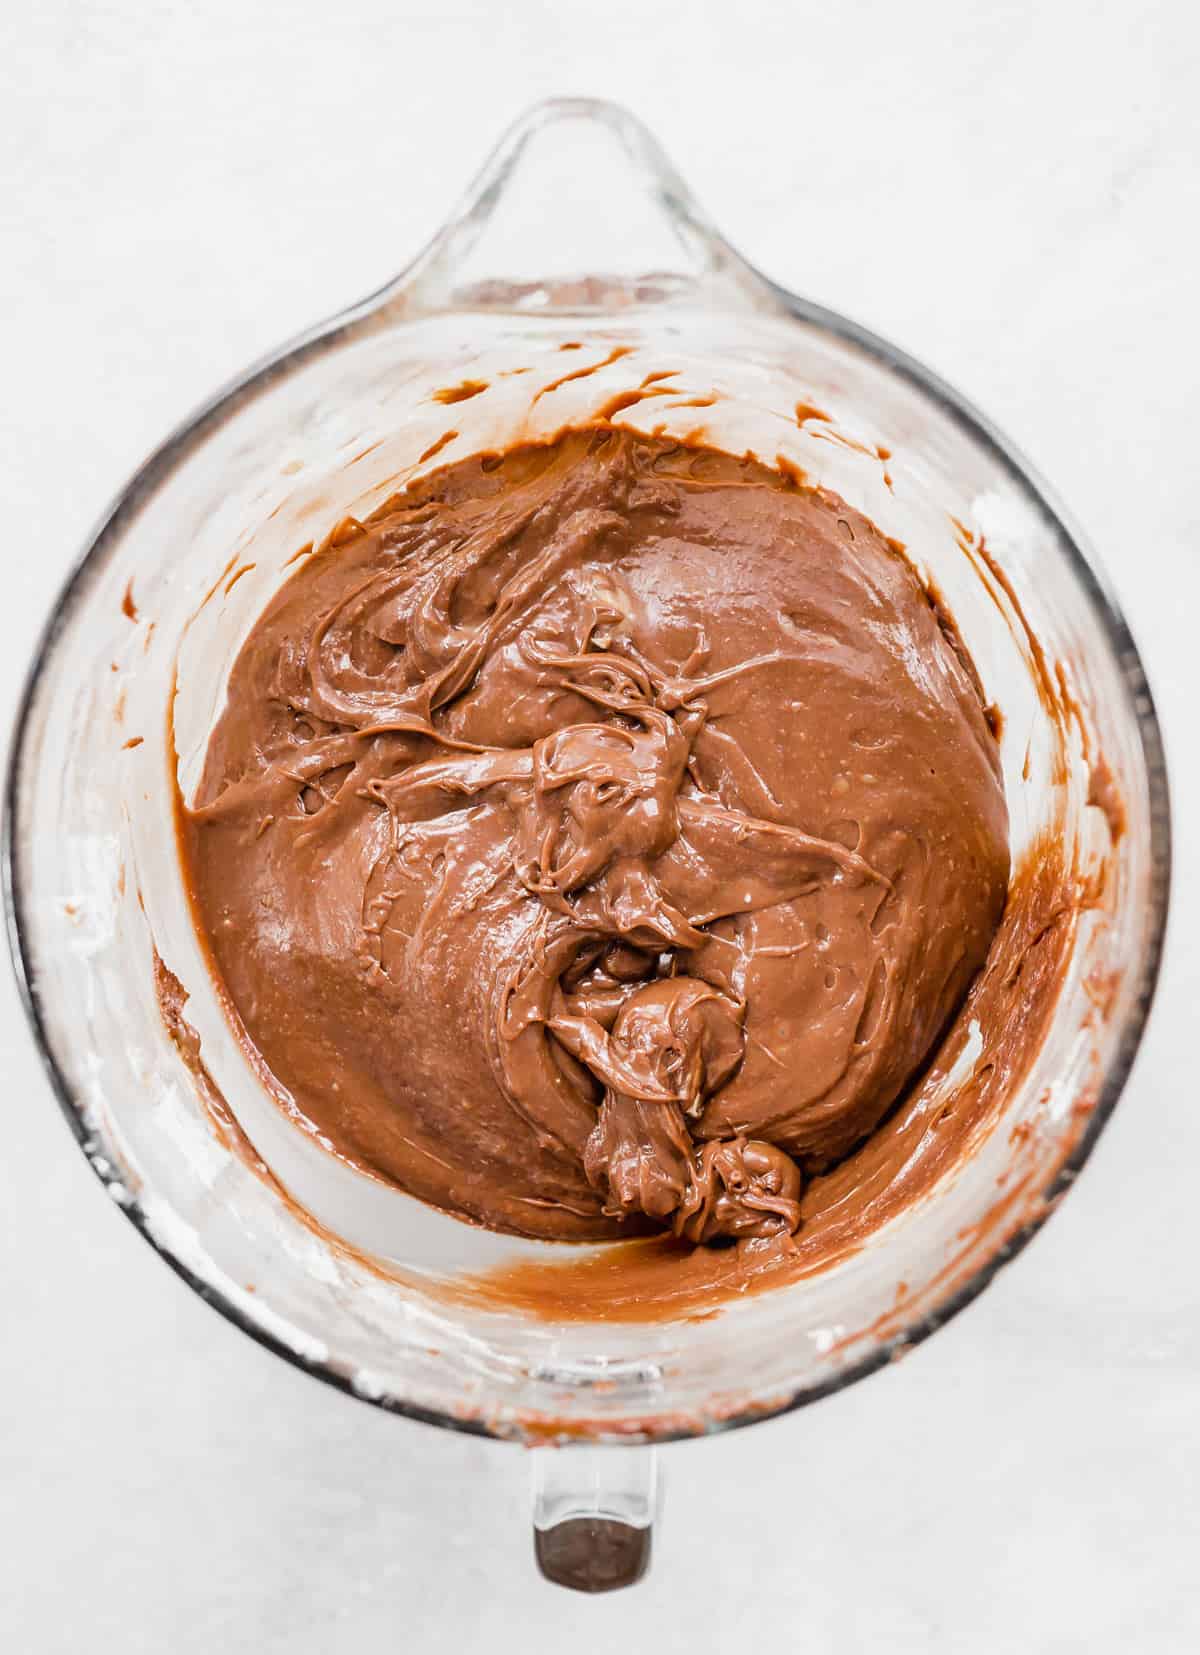 A creamy Nutella Cheesecake filling in a glass mixing bowl on a white background.